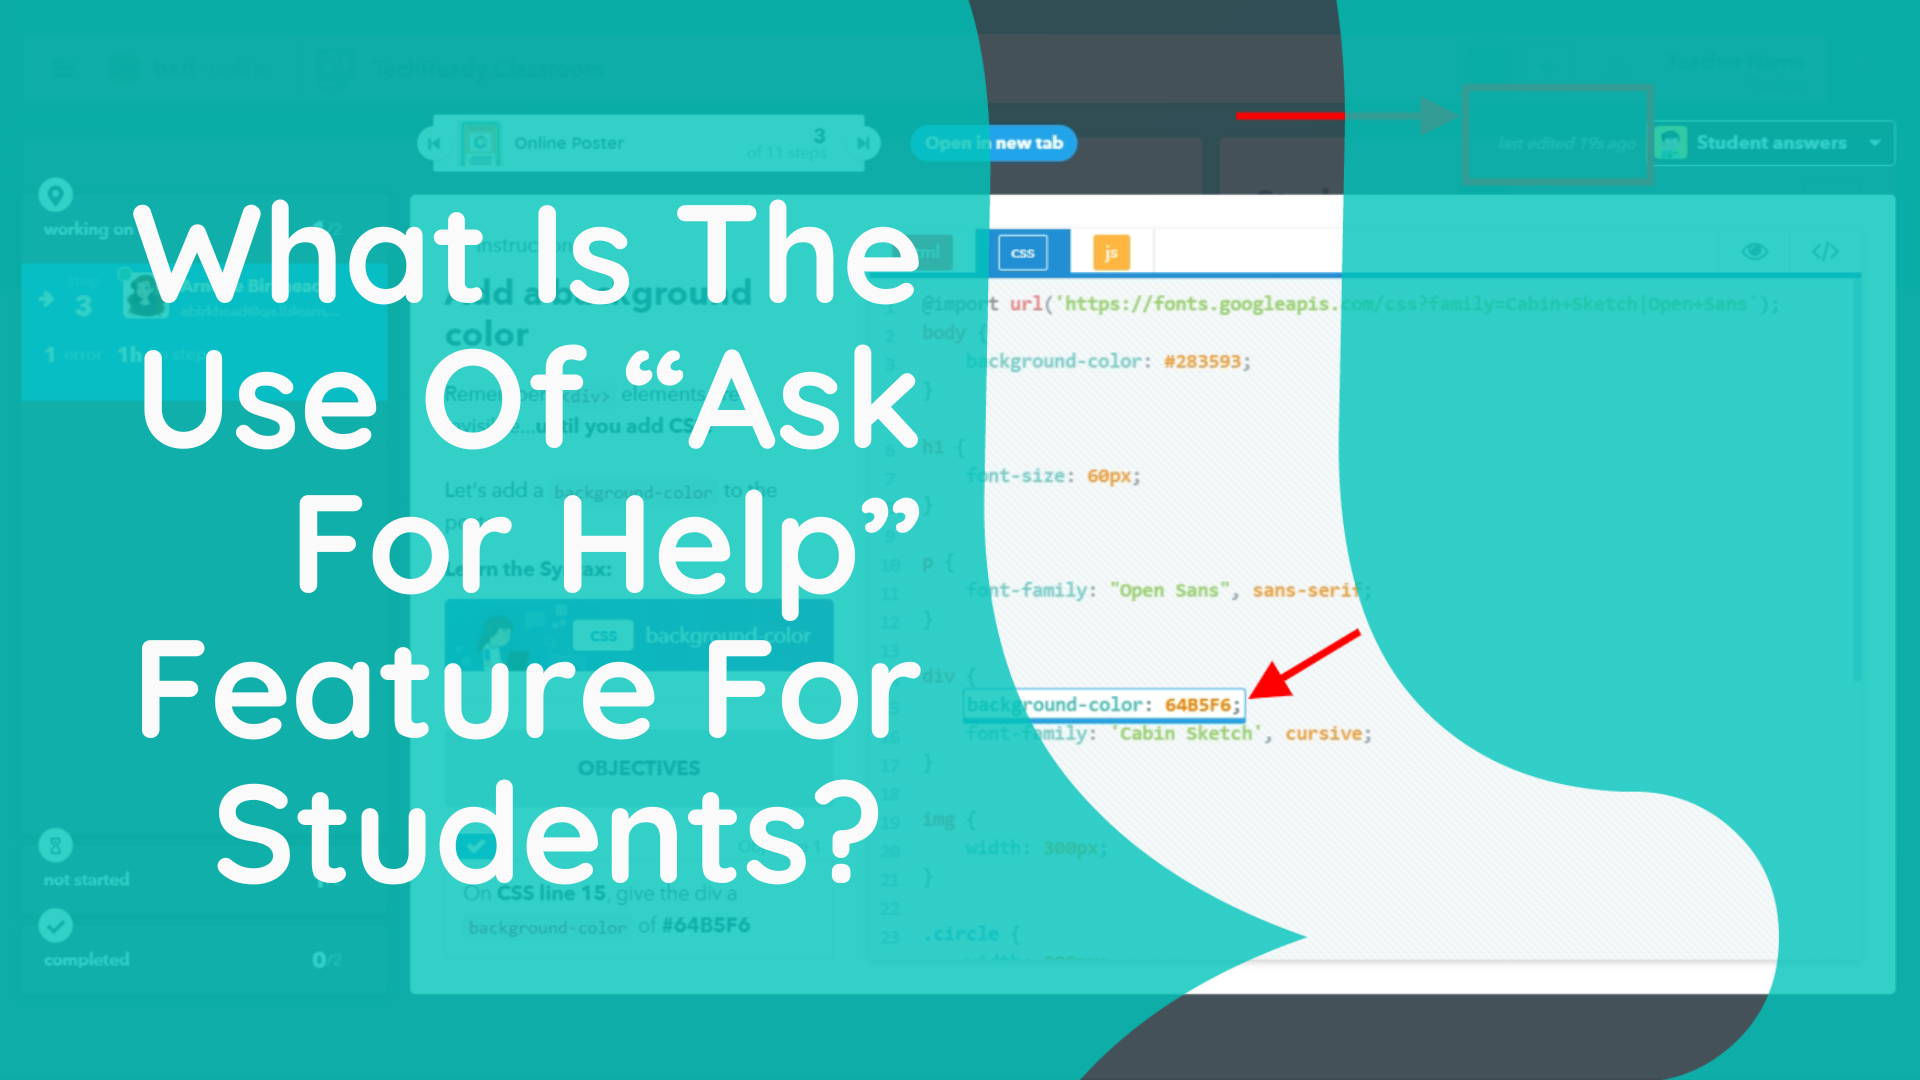 What Is The Use Of “Ask For Help” Feature For Students?